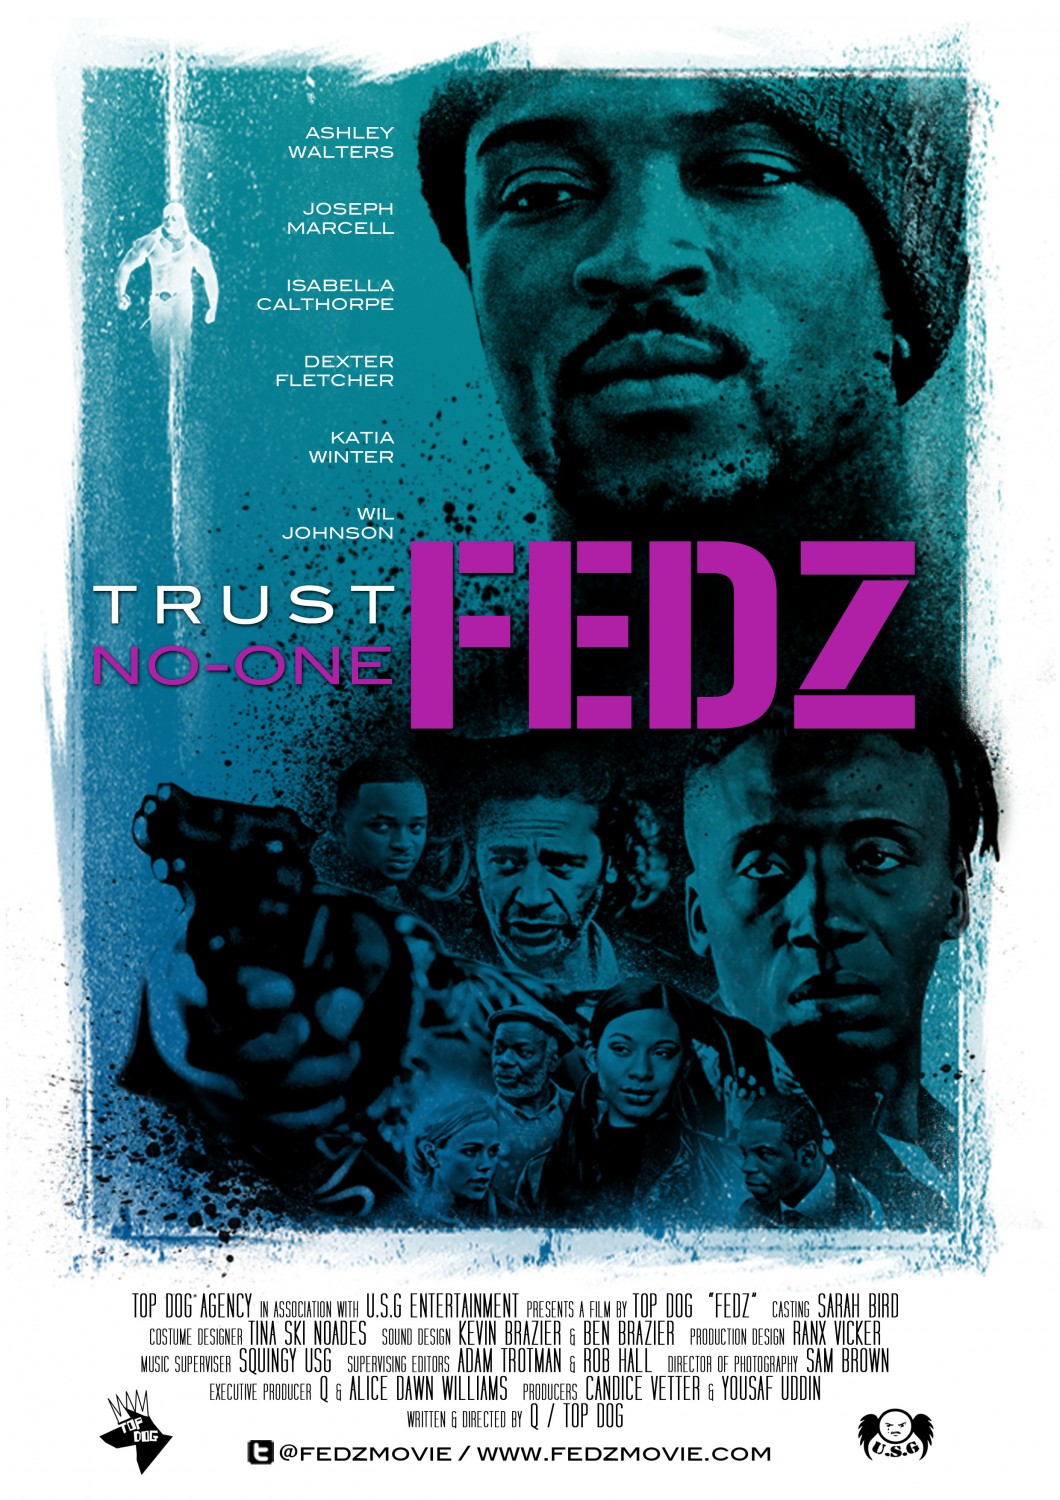 Extra Large Movie Poster Image for Fedz 